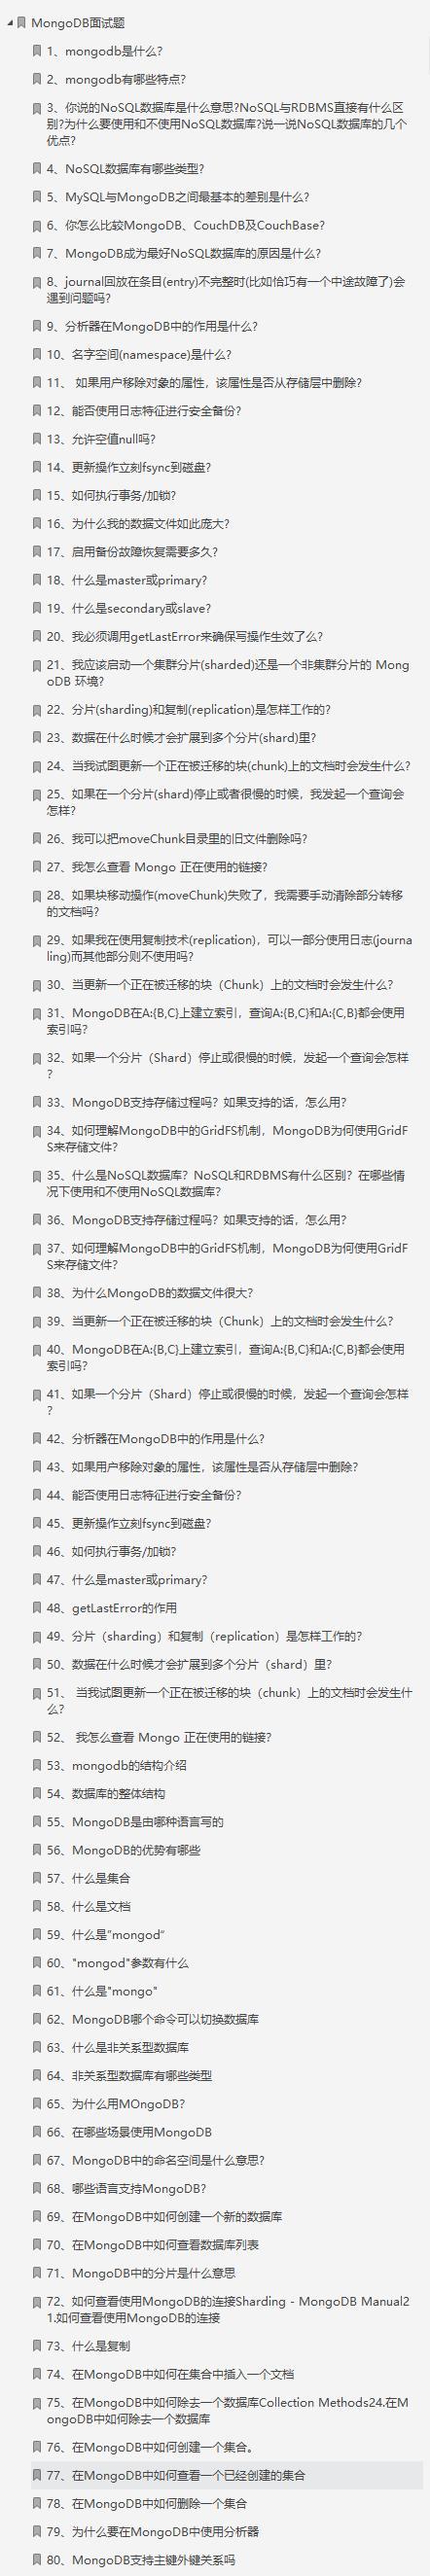 Ali, Byte, Tencent, and interview questions are all covered, and this Java interview document is too strong